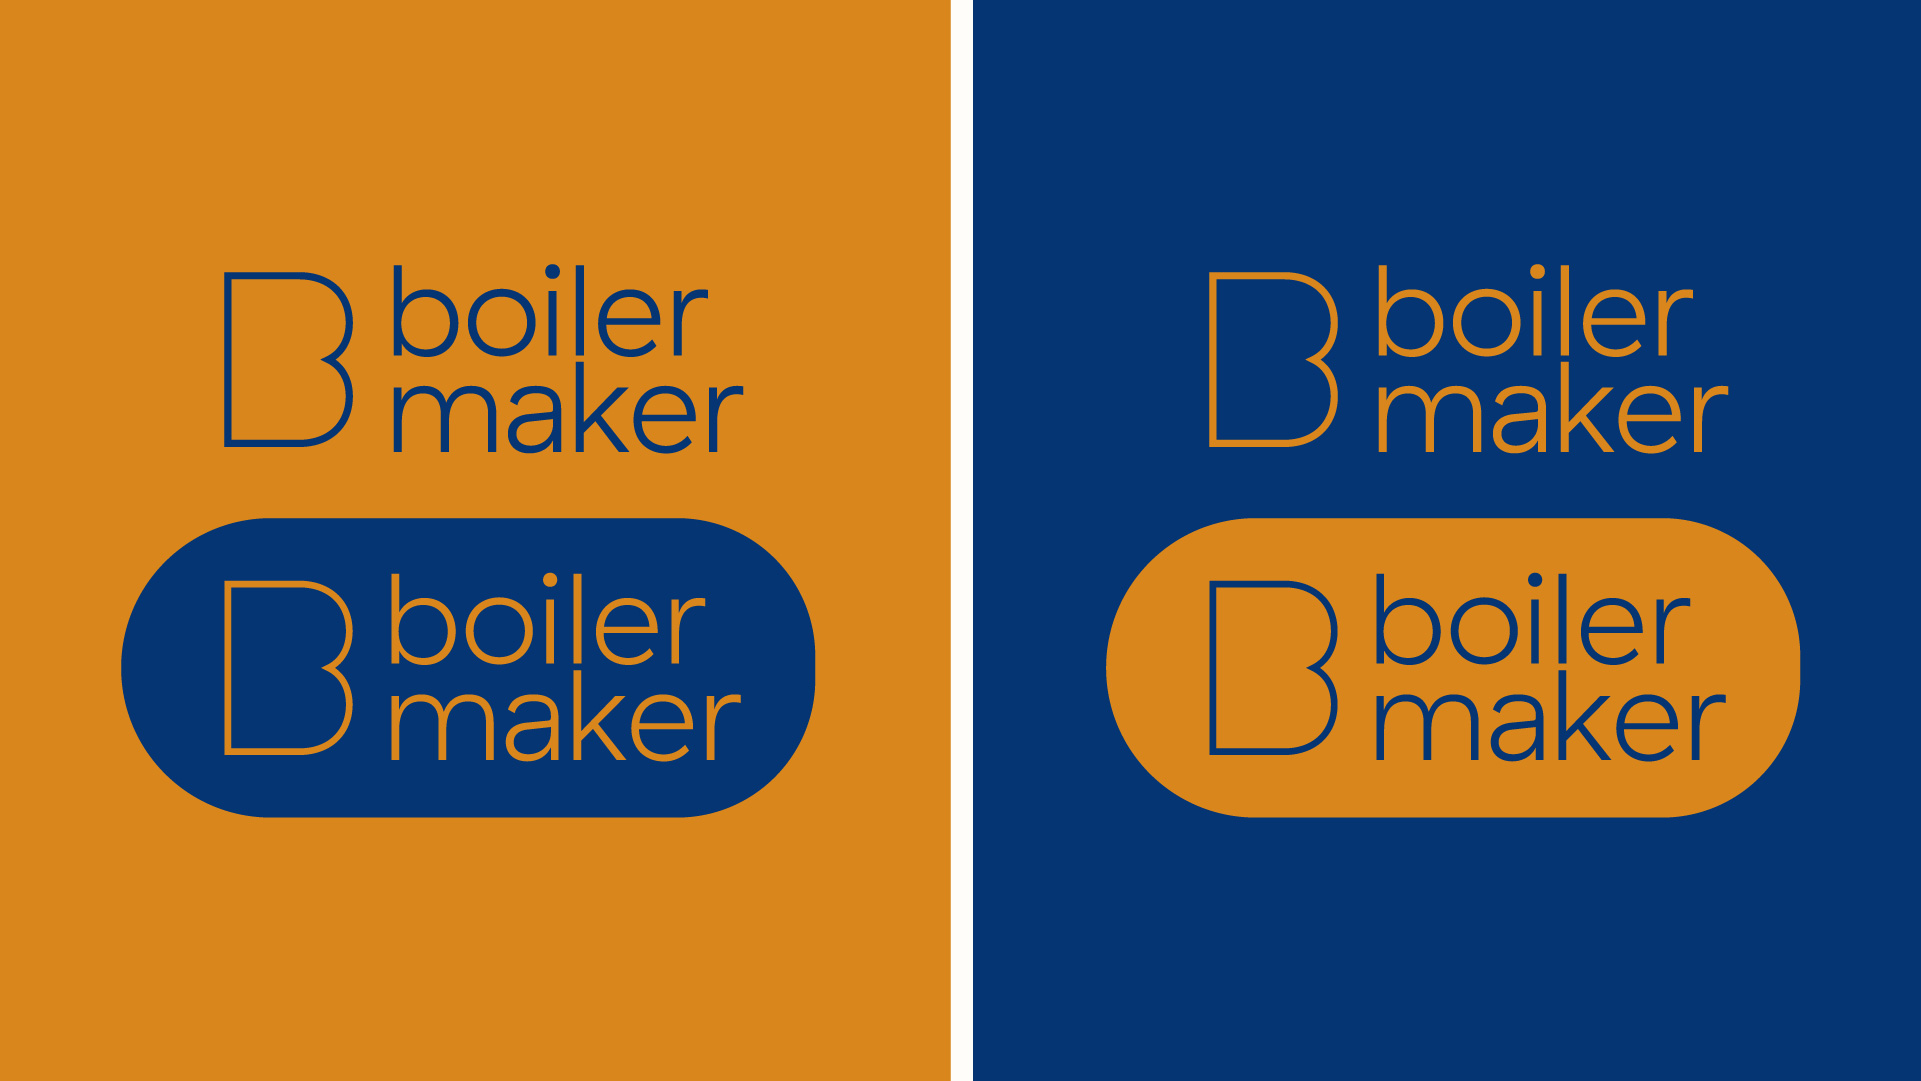 Two images of the boiler maker logo and wordmark